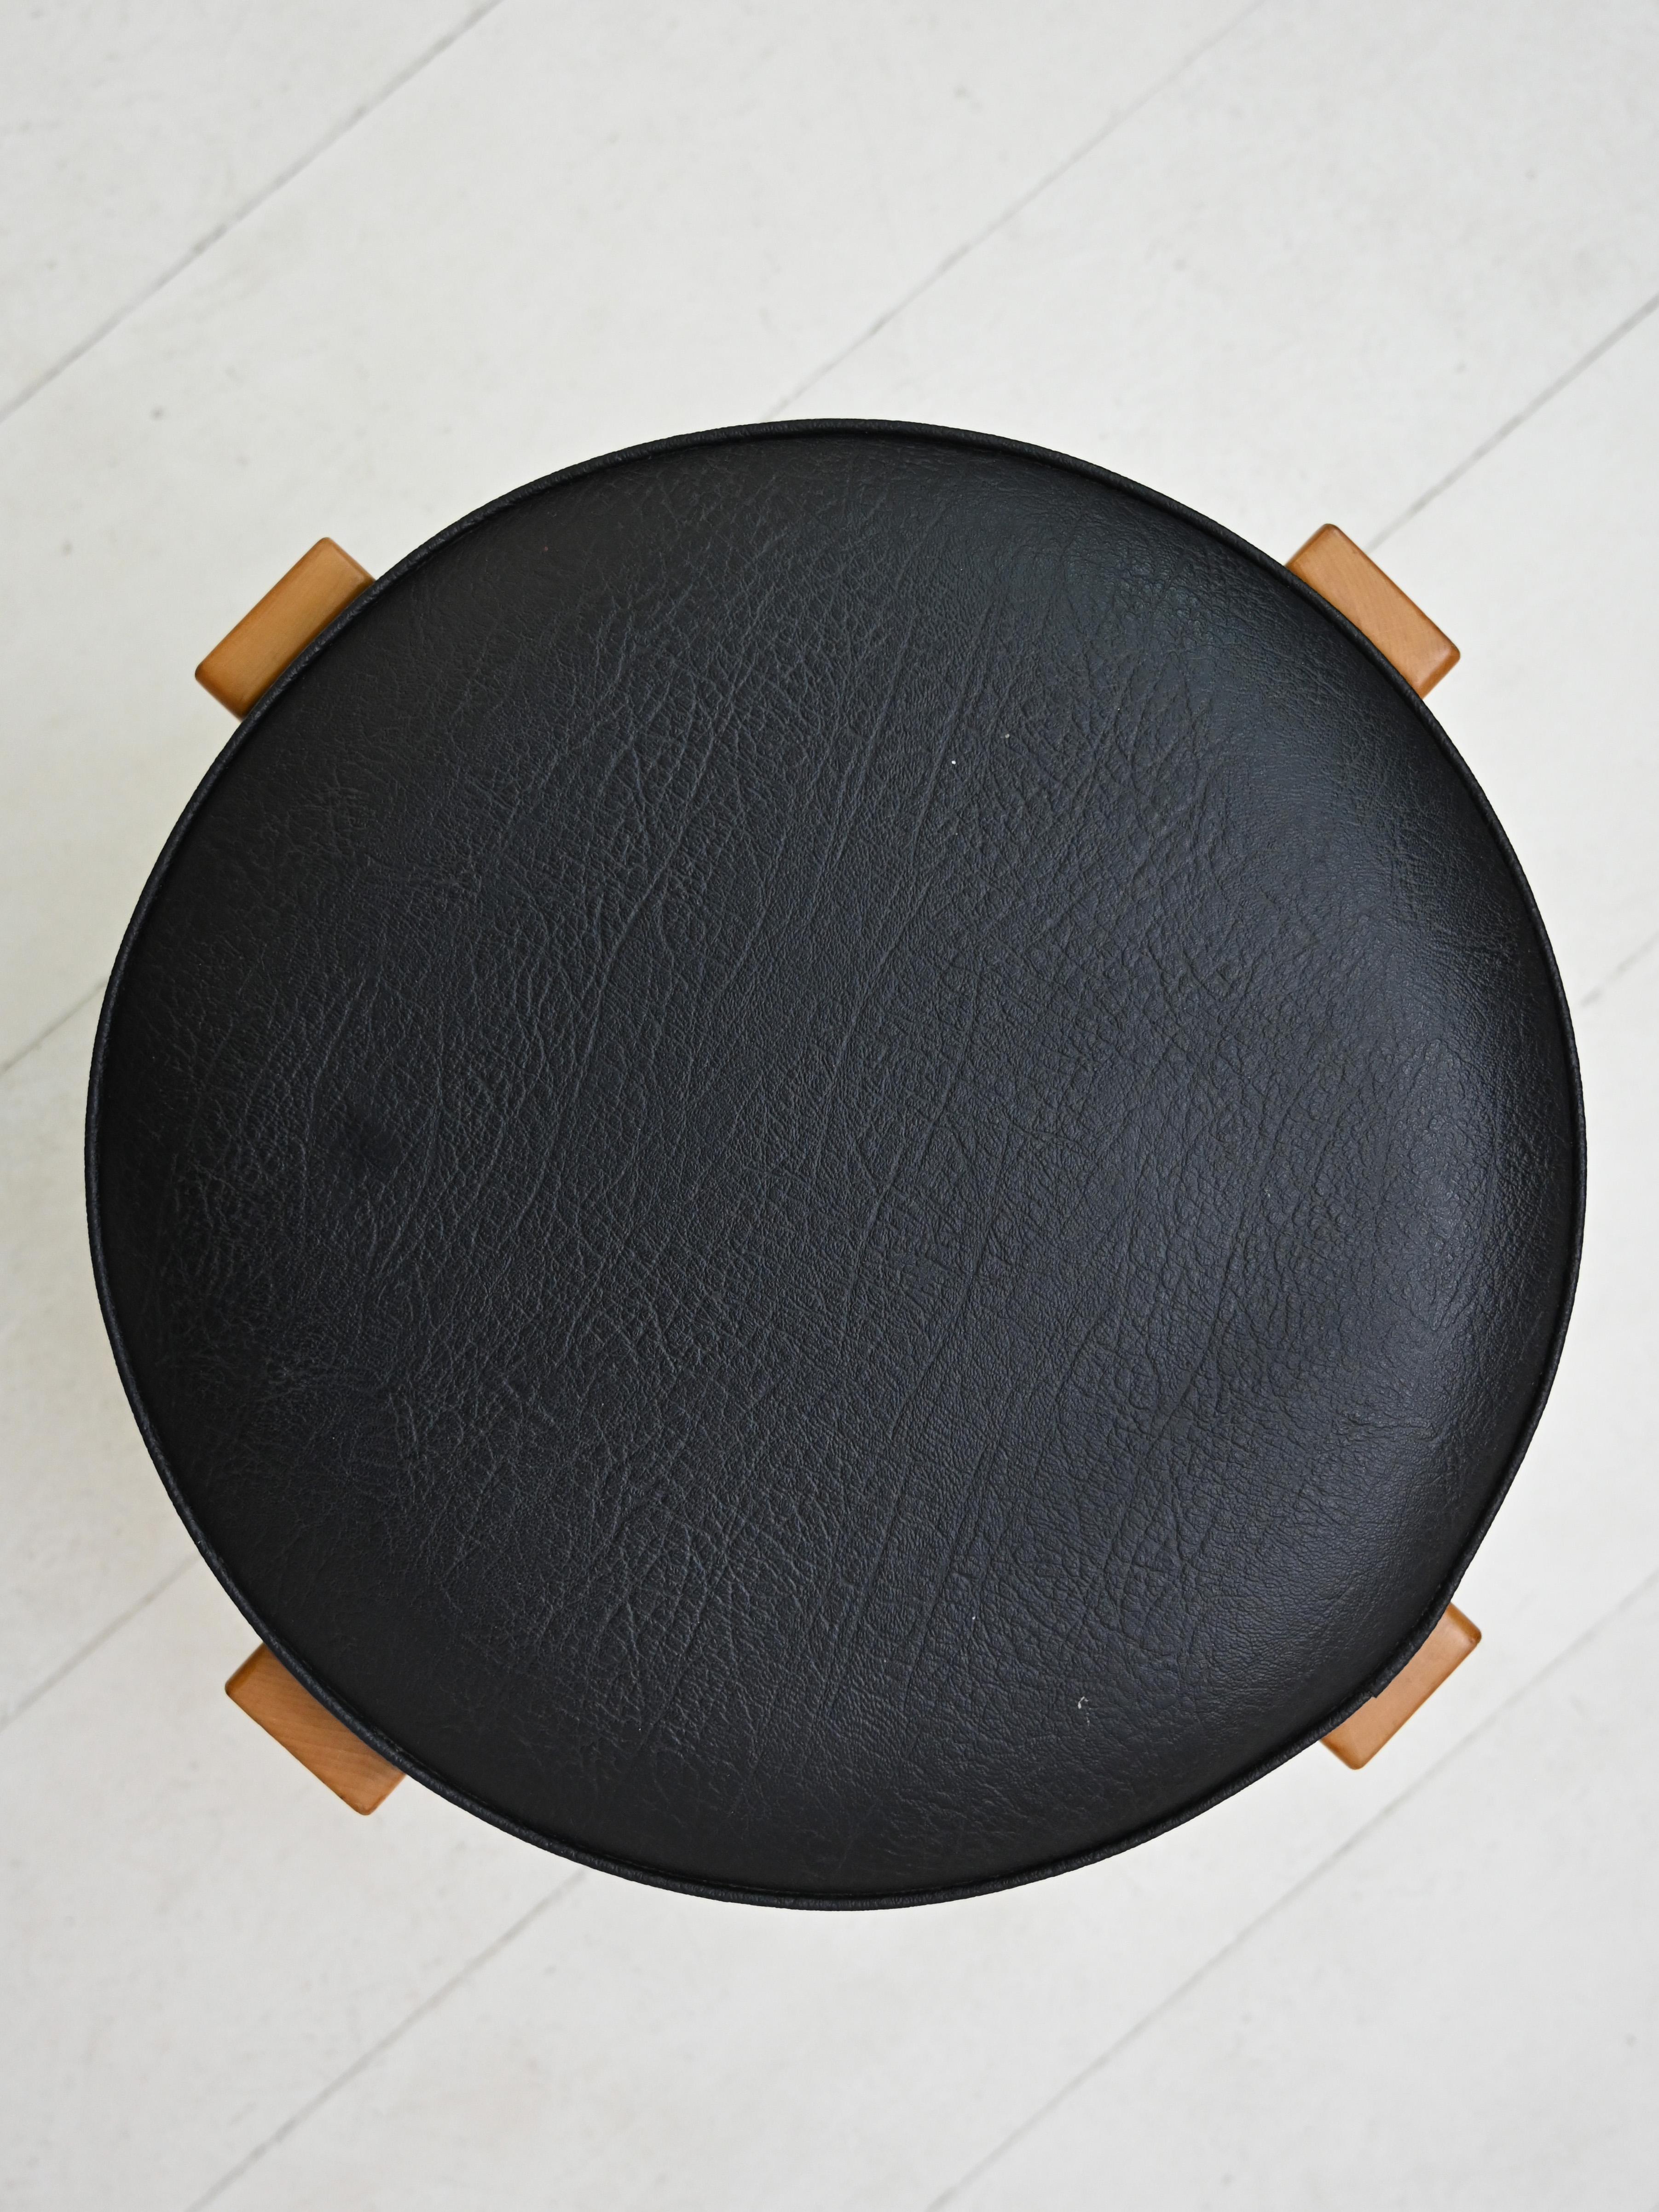 Mid-20th Century Scandinavian Leather Stool For Sale